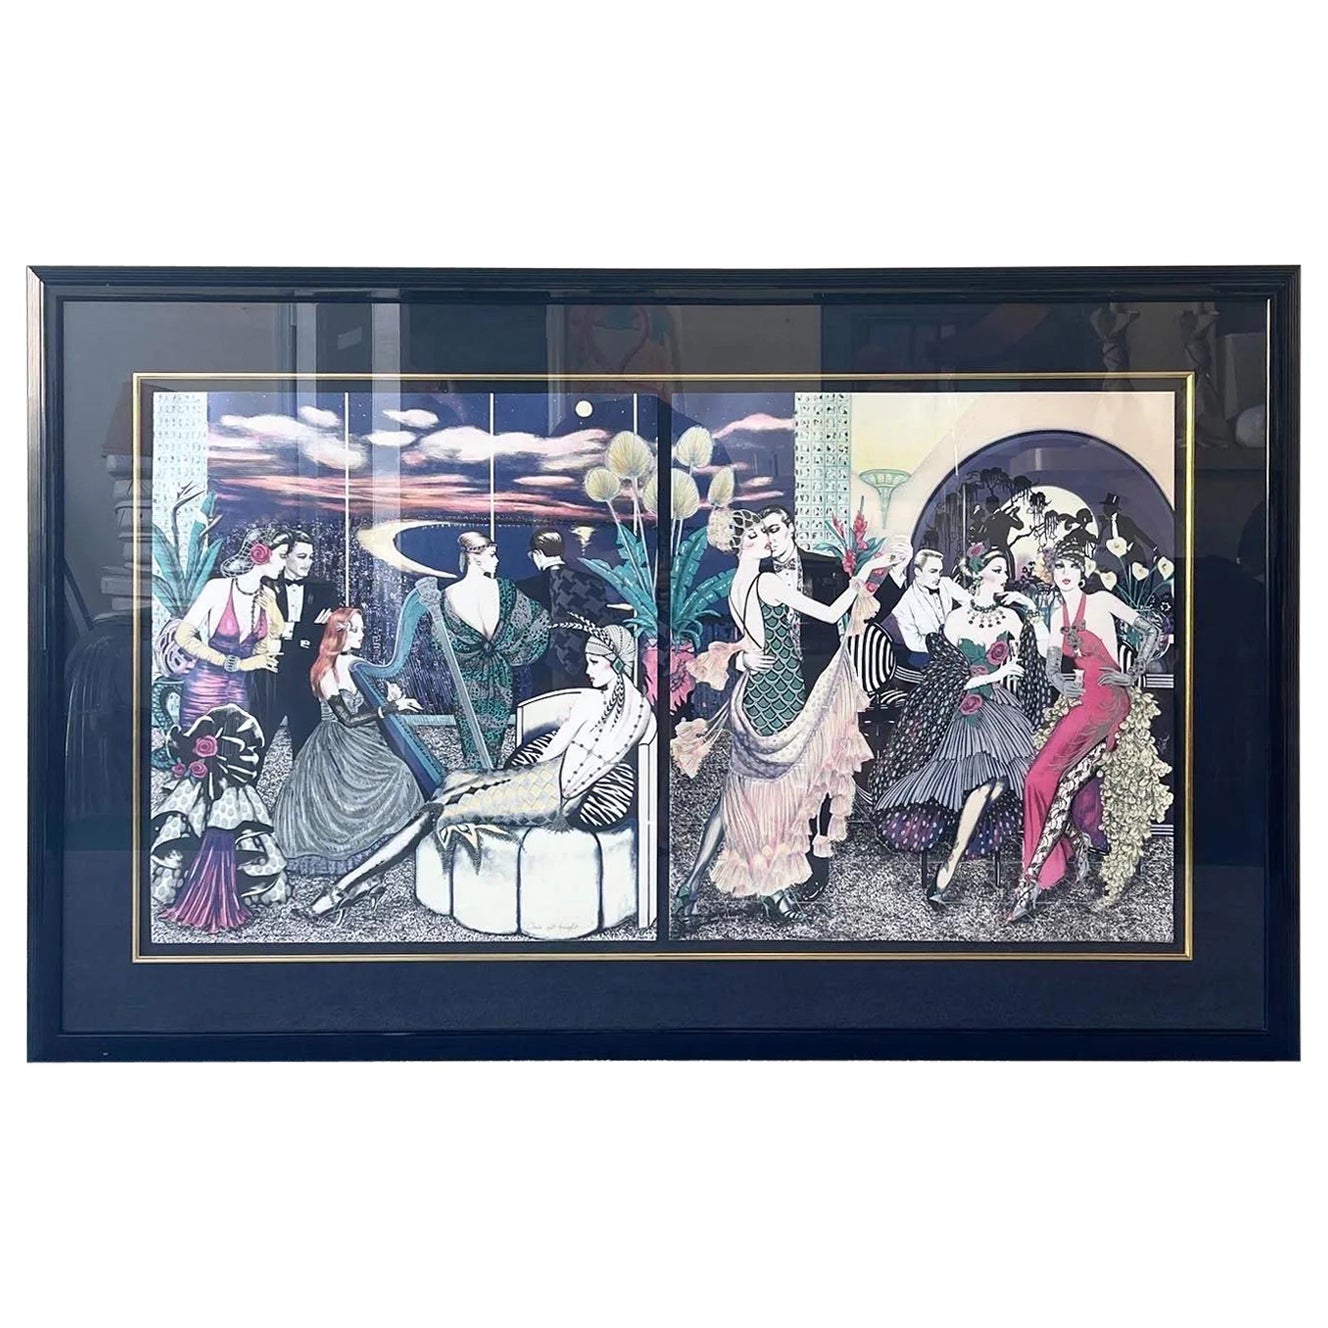 Art Deco Lithographs “Who Needs Tomorrow?” & “We’ve Got Tonight” by Mary Vickers For Sale